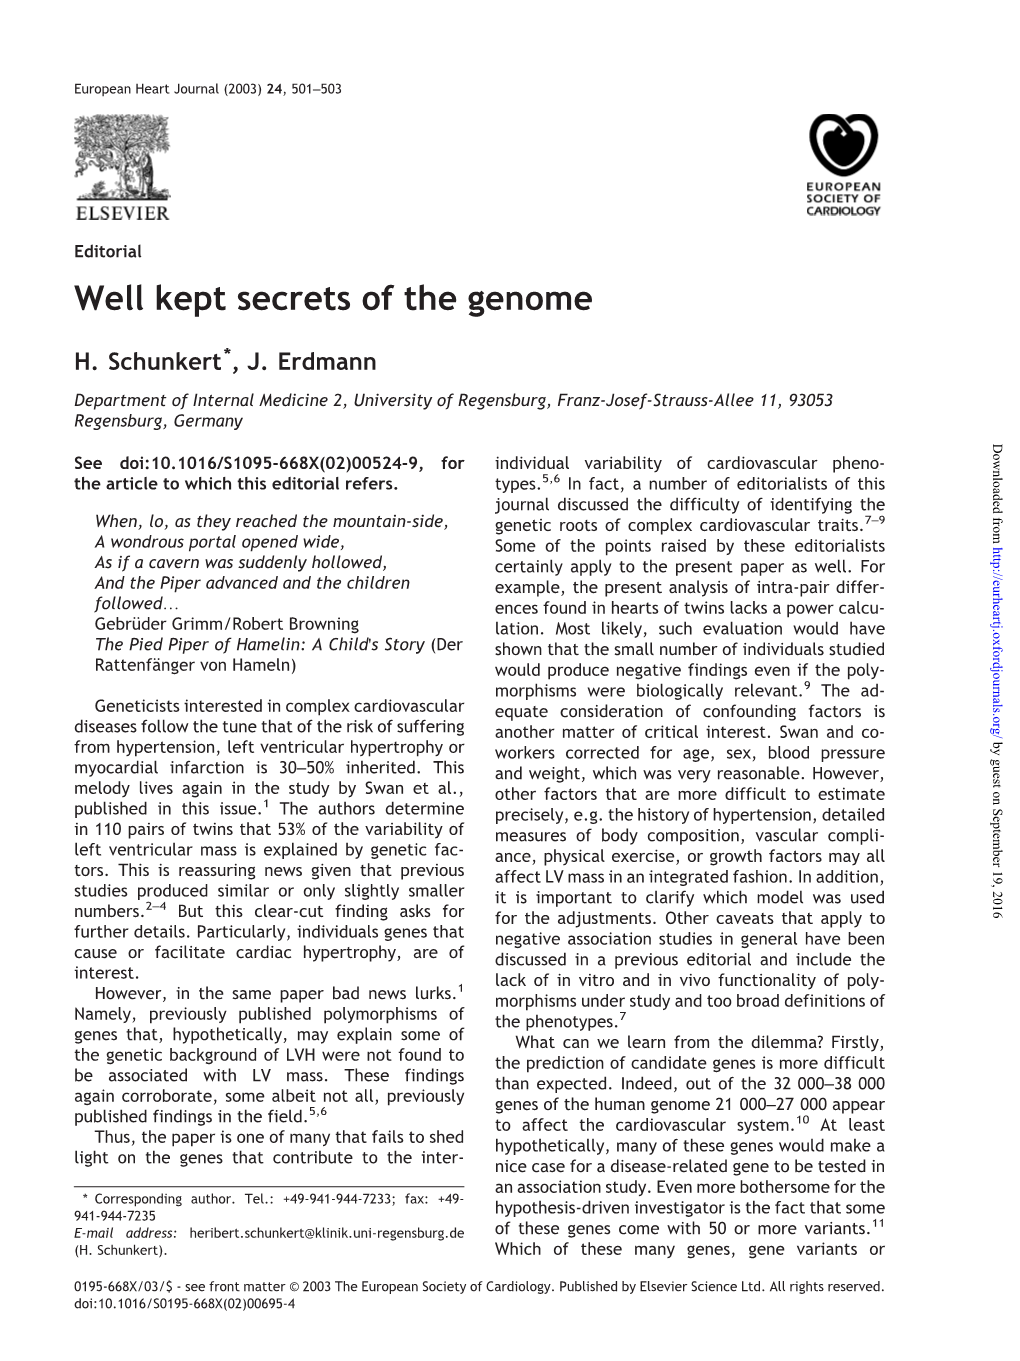 Well Kept Secrets of the Genome